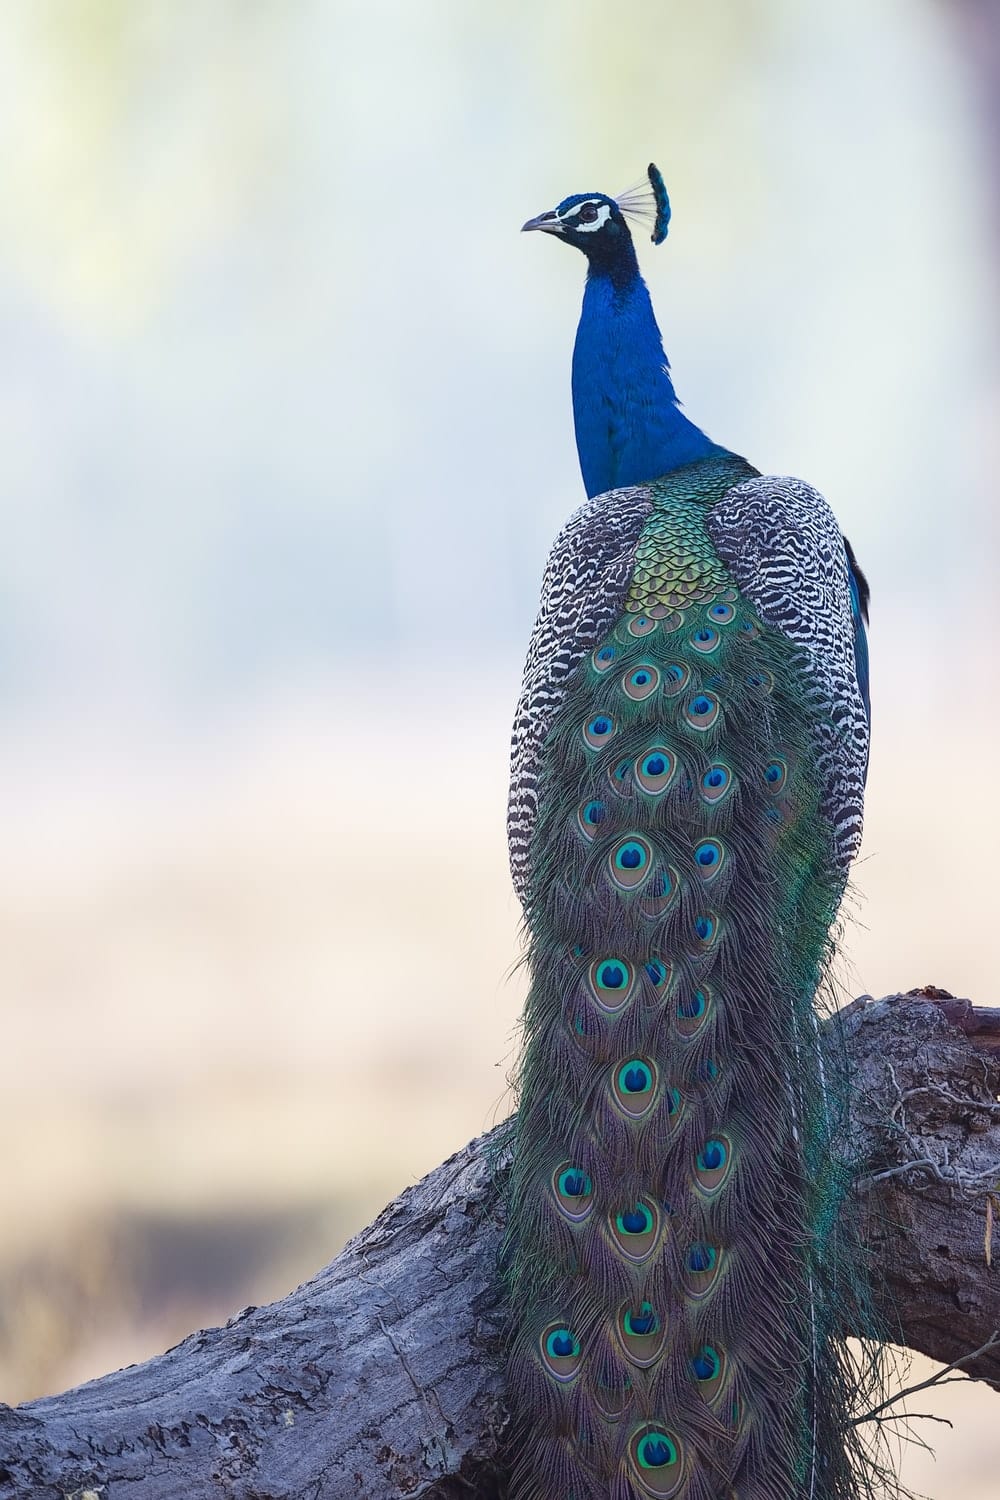 Cross Stitch | Peacock - Blue And Green Peacock - Cross Stitched